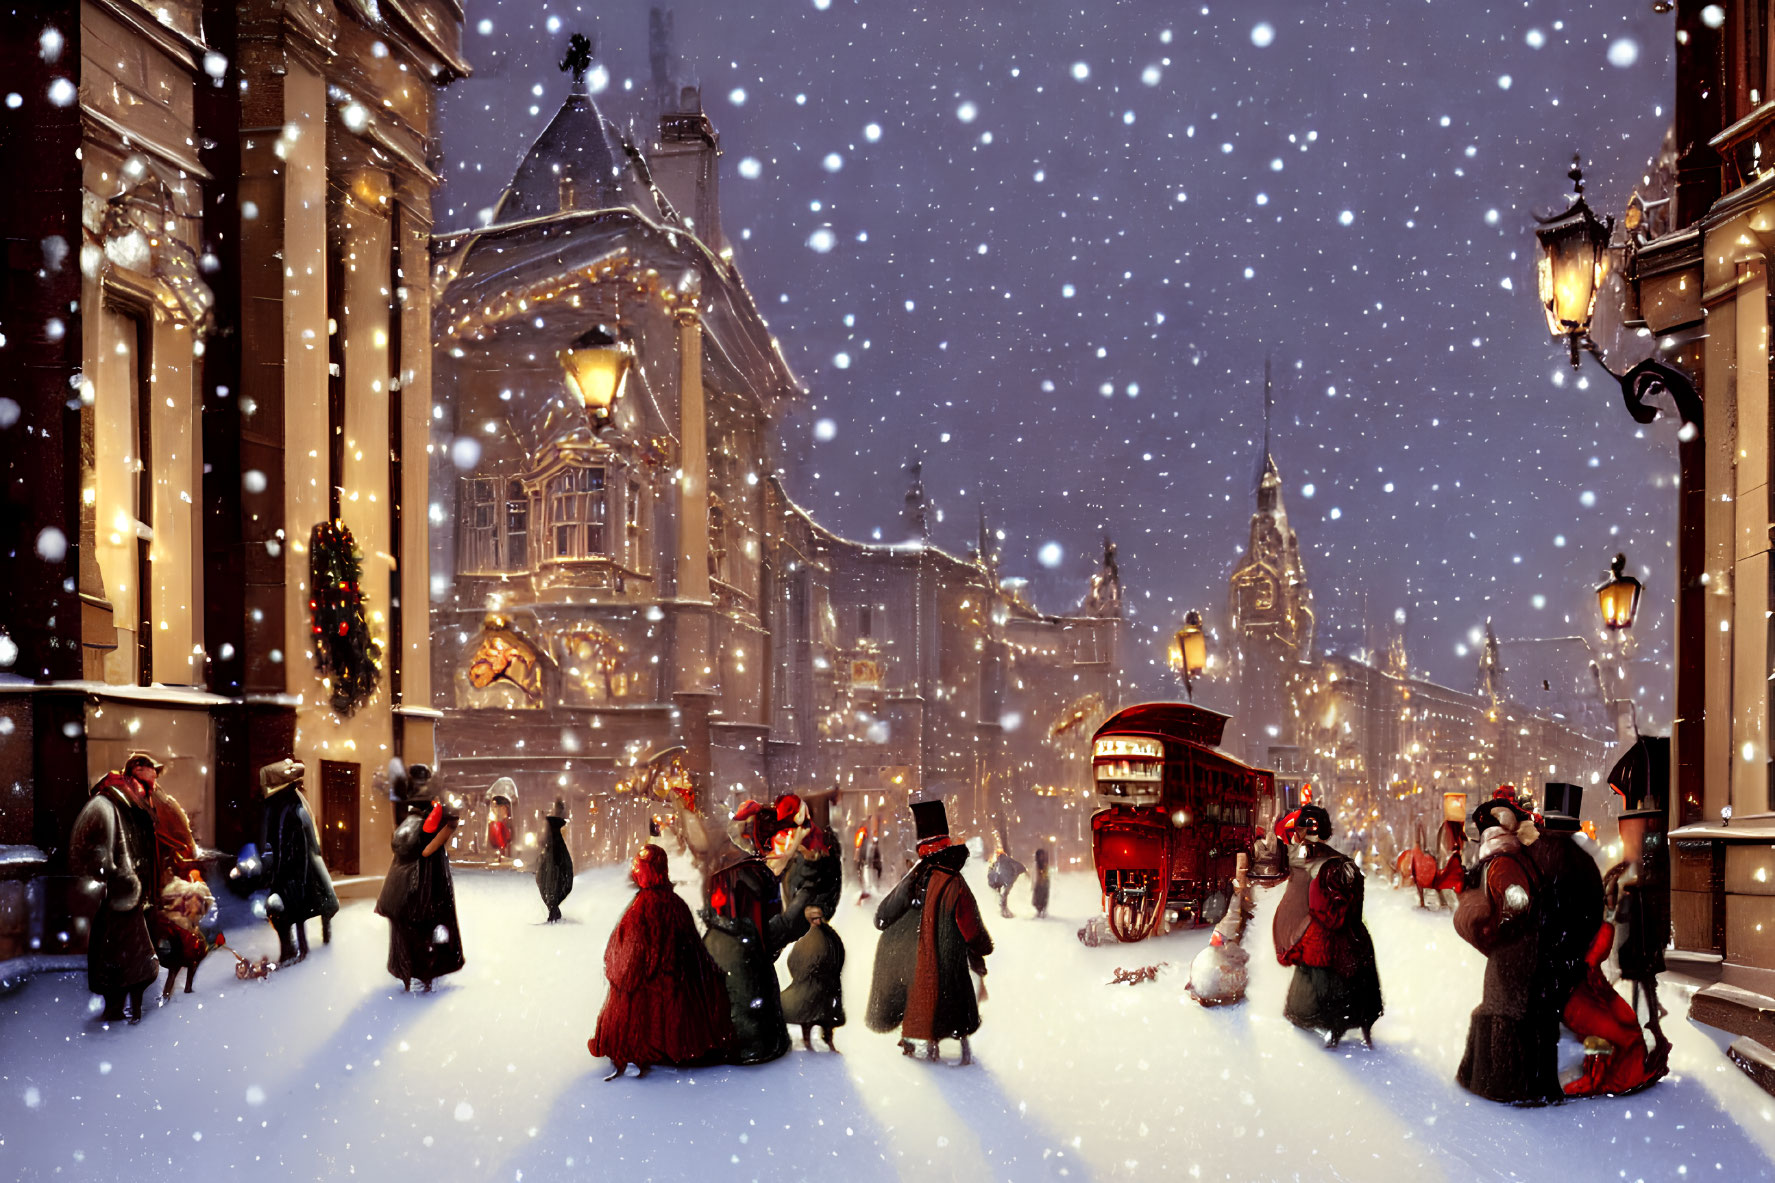 Victorian Christmas street scene with snow, bus, and decorations